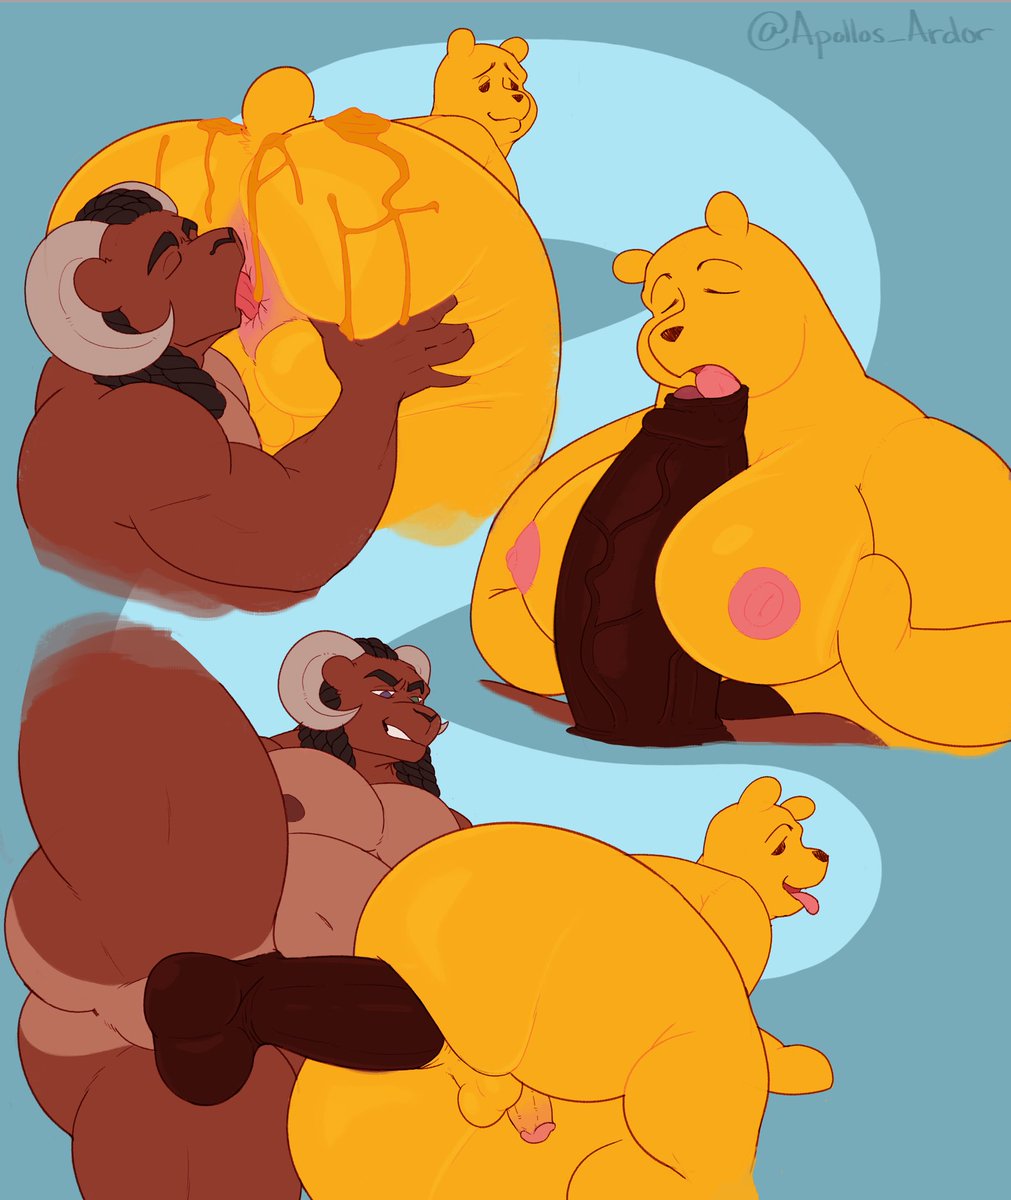 Its Umbers birthday and he wanted a big honey glazed yellow cake all to himself~